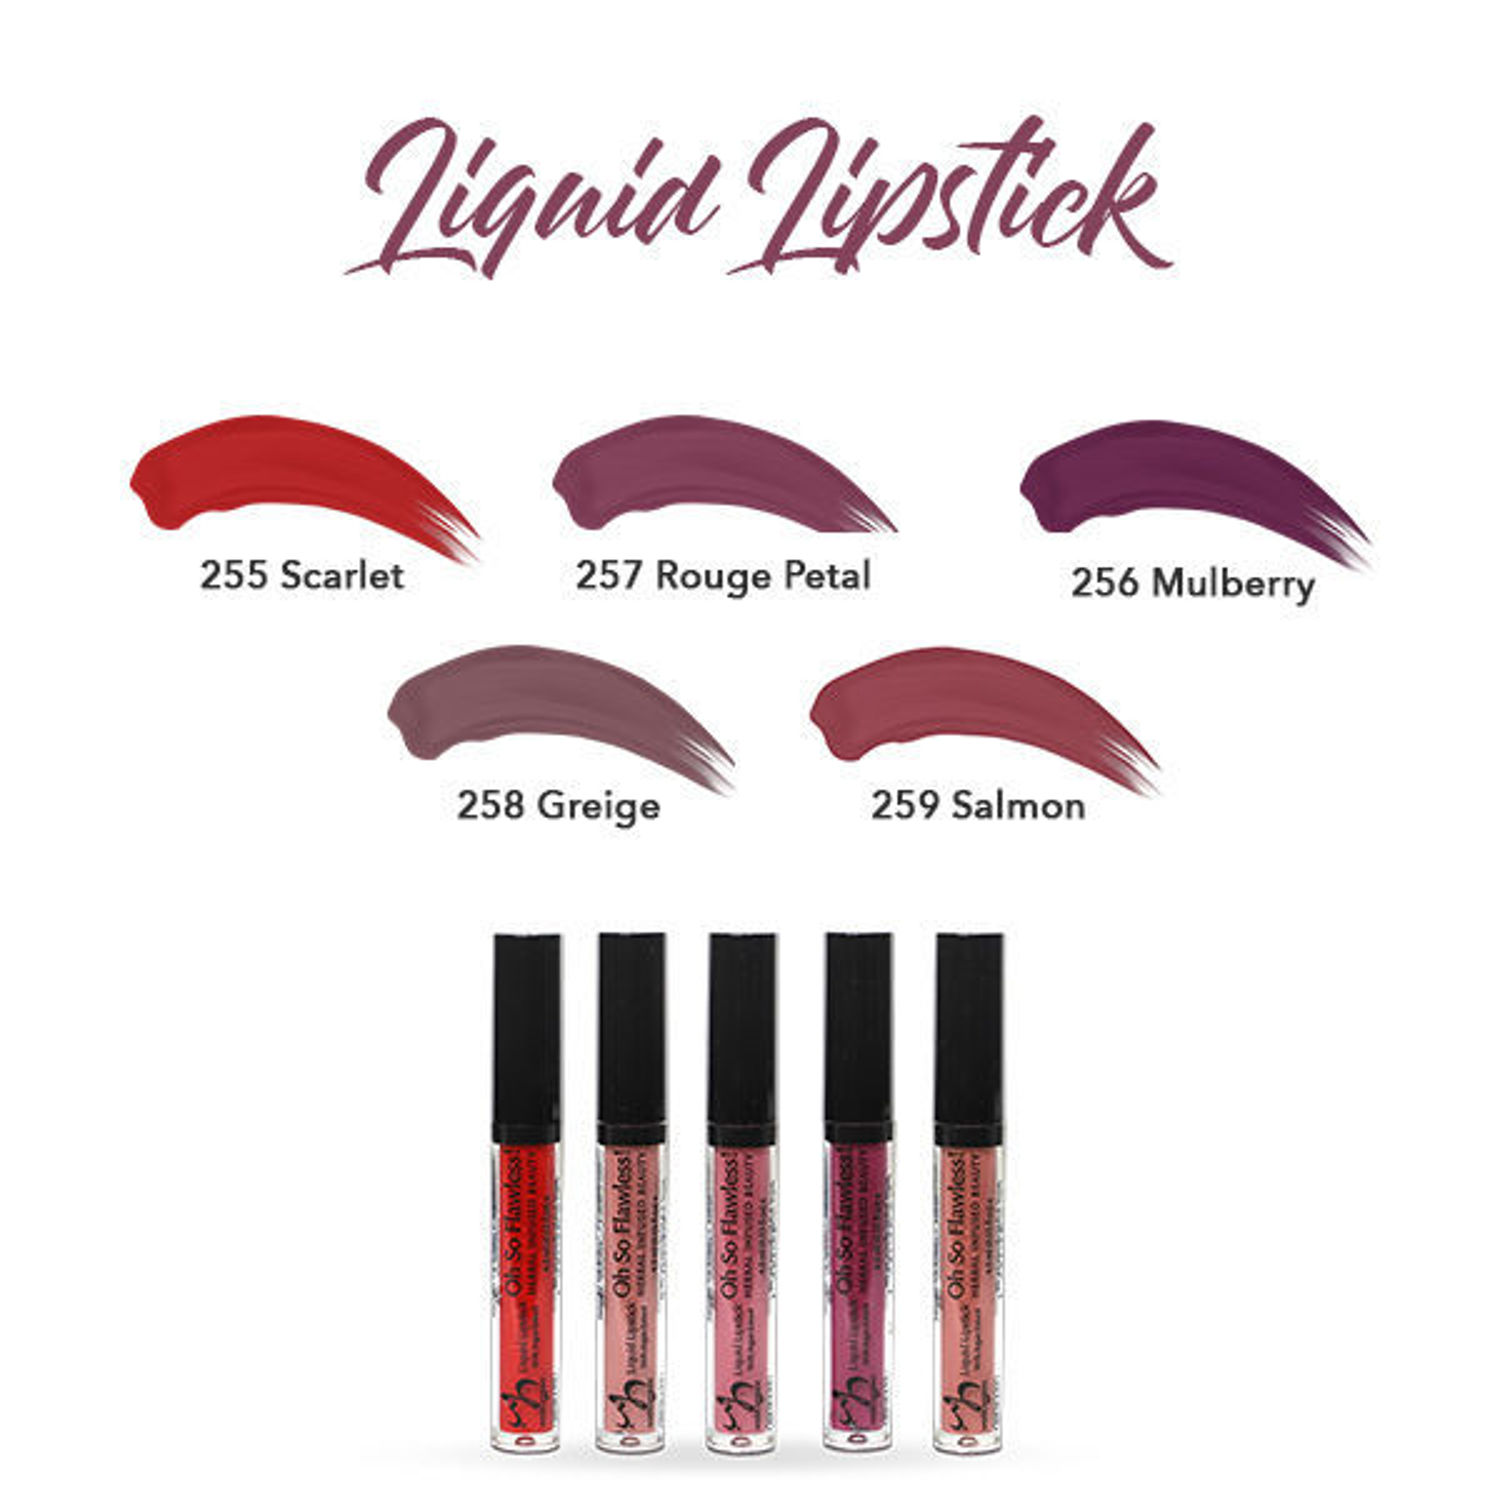 HERBAL INFUSED BEAUTY Liquid Lipstick Swatches